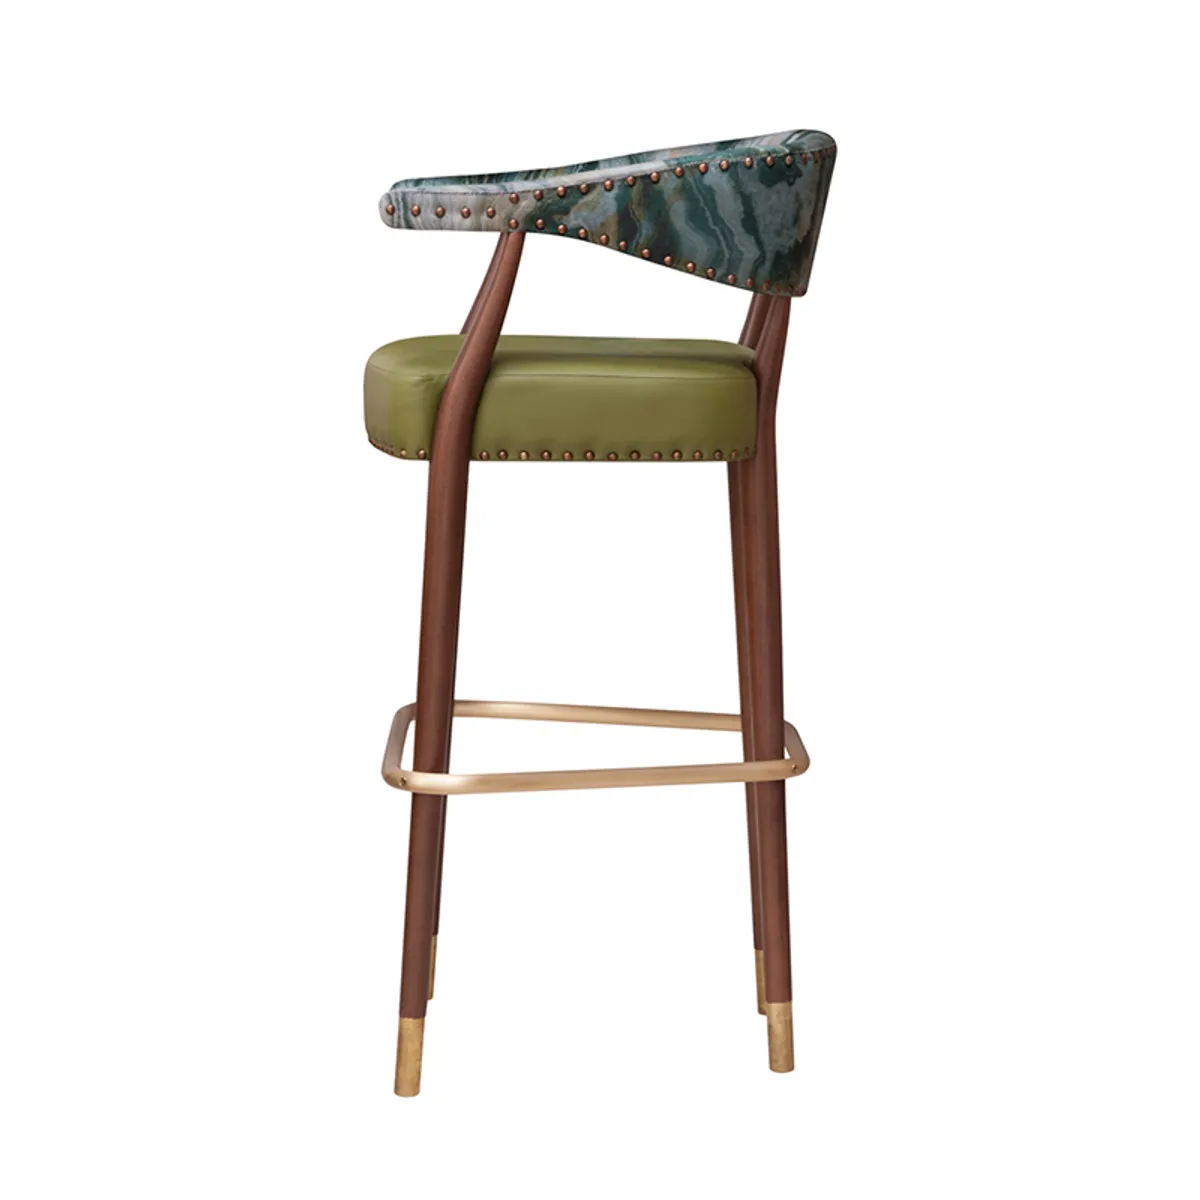 Clara Bar Stool Furniture For Bars With Stud Detailing And Metal Slipper Cups On Wooden Legs 0984